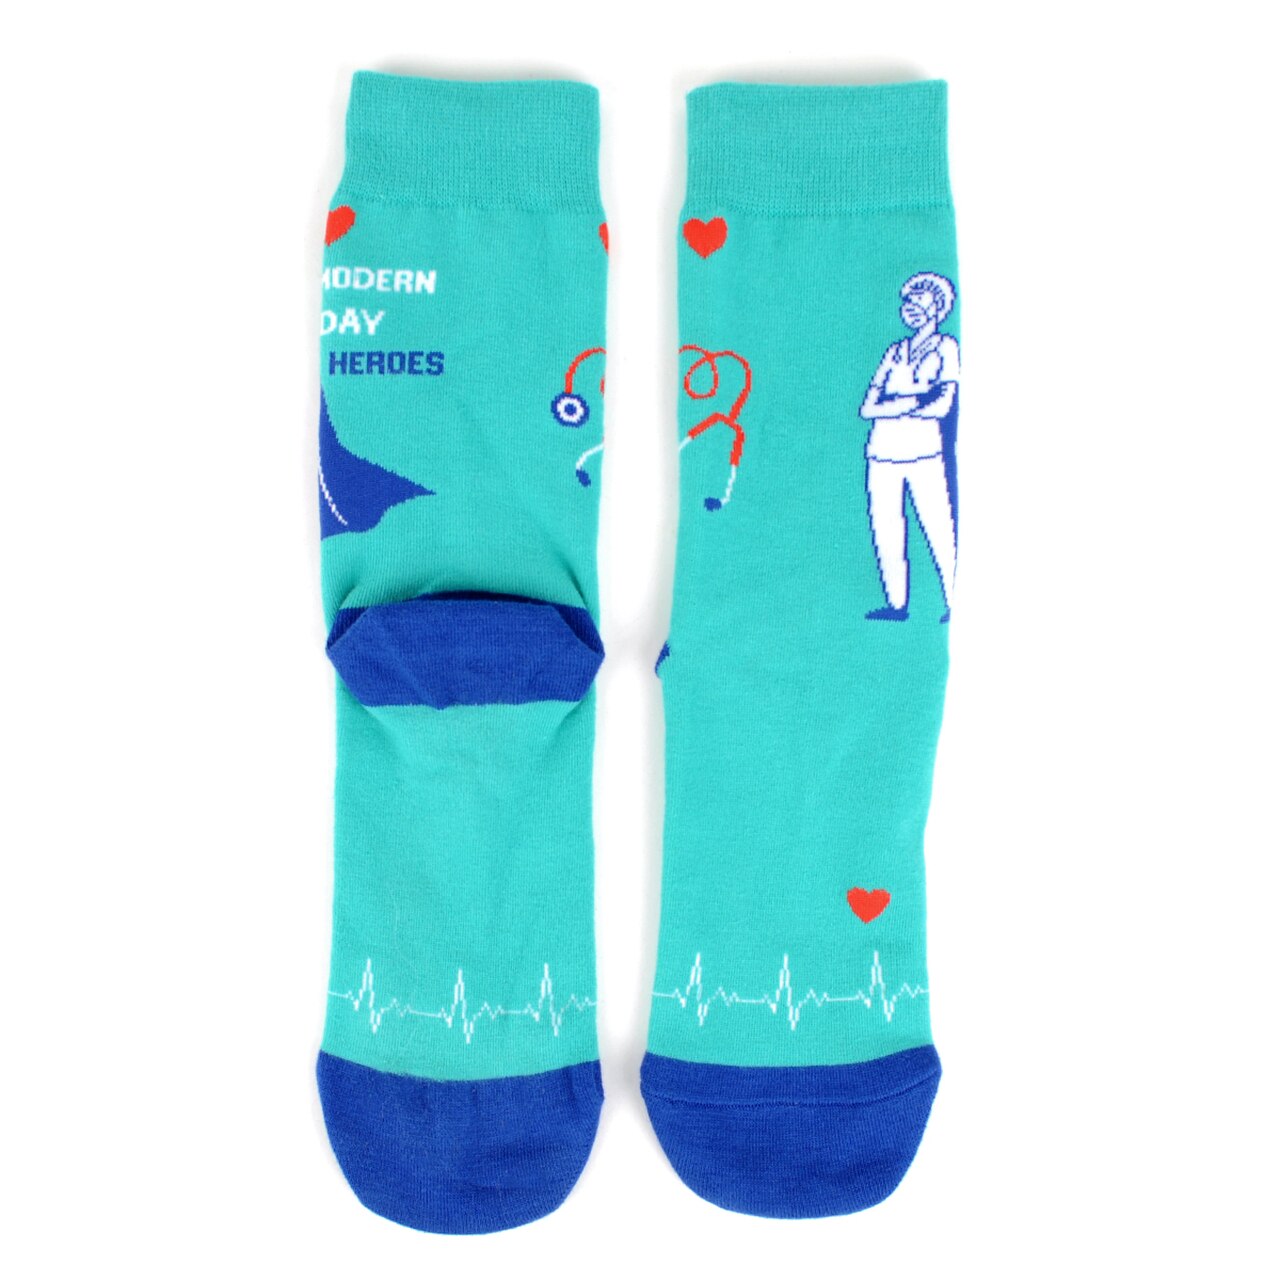 MashasCorner.com   Health Care Heroes -Modern Heroes- Ultra Premium Socks  Material: 68% cotton, 29% polyester, 3% spandex Sizes: available in S/M and L/XL S/M: men shoe size: 4.5-7.5, ladies shoe size: 5.5-9.5 L/XL: men shoe size: 8-12, ladies shoe size: 10-10.5 Unisex style